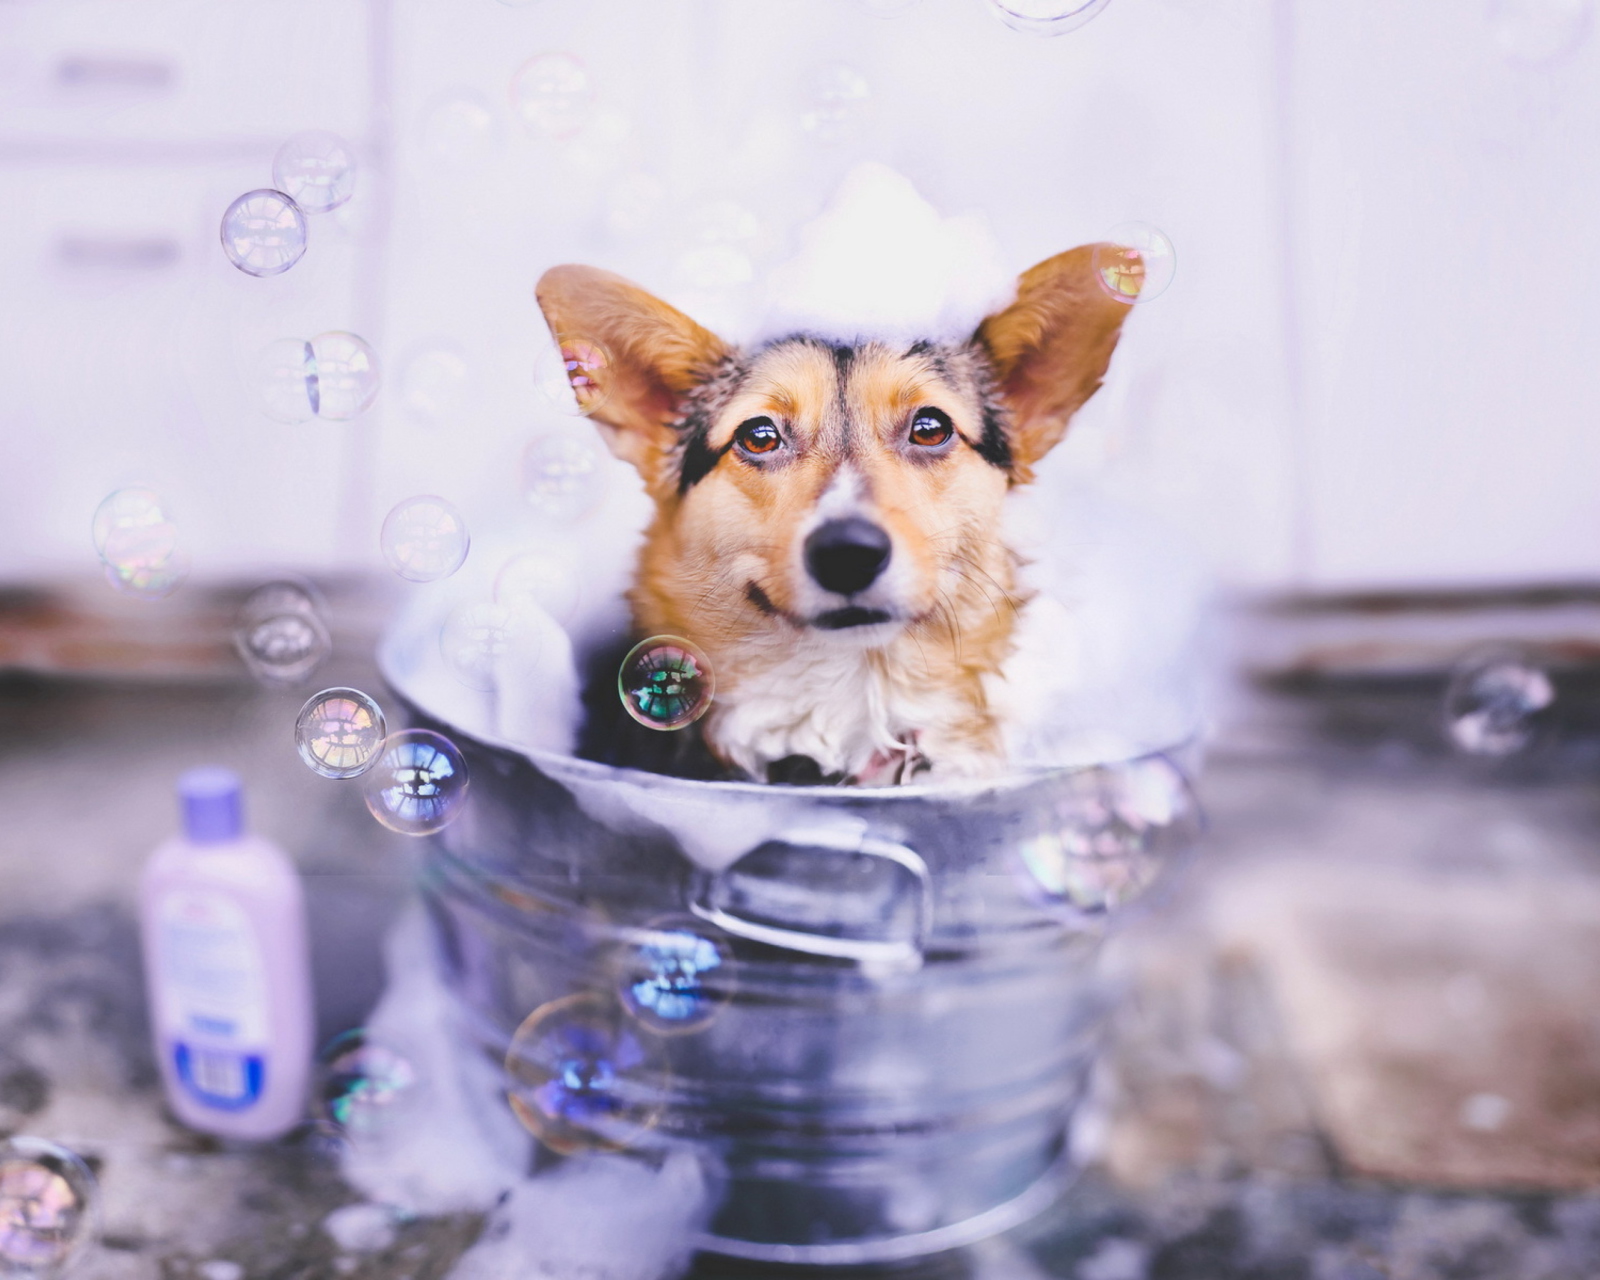 Dog And Bubbles wallpaper 1600x1280